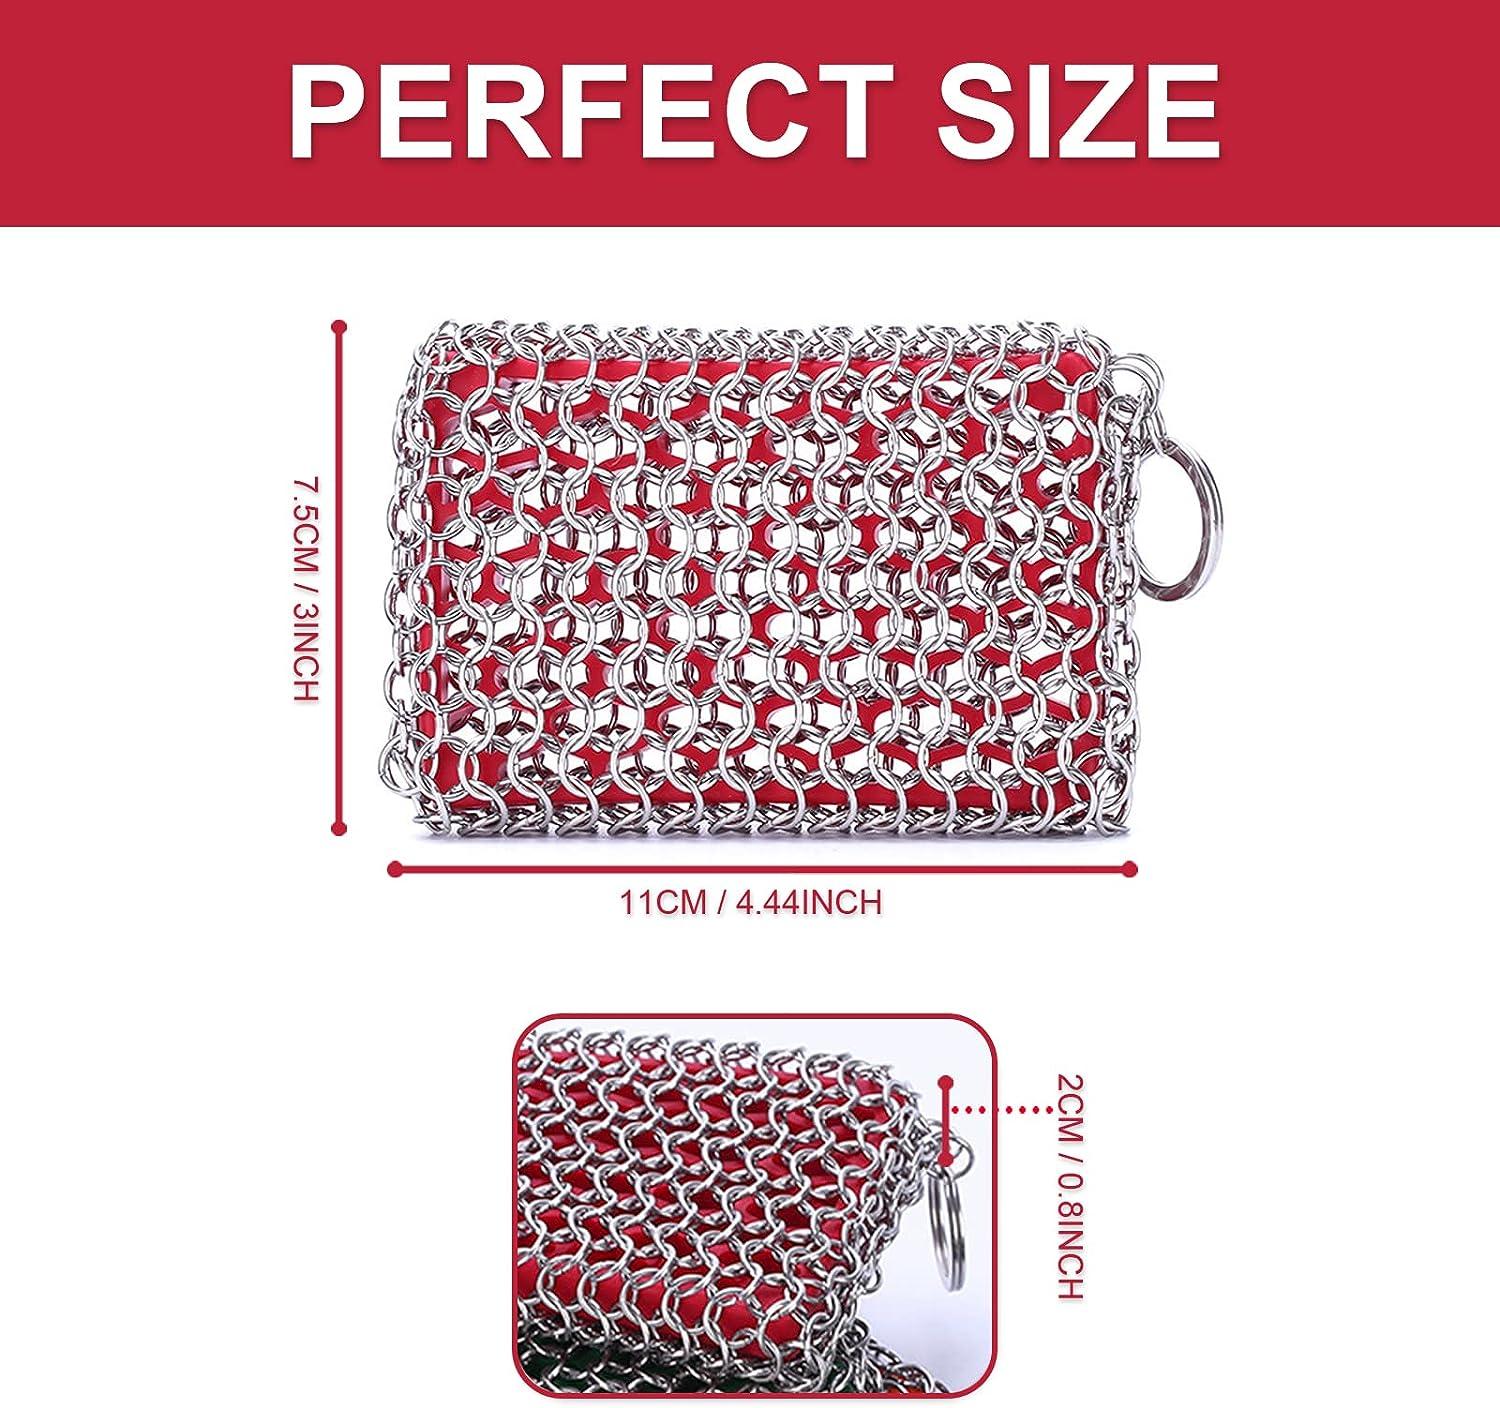 Lodge Chainmail Scrubbing Pad, Red